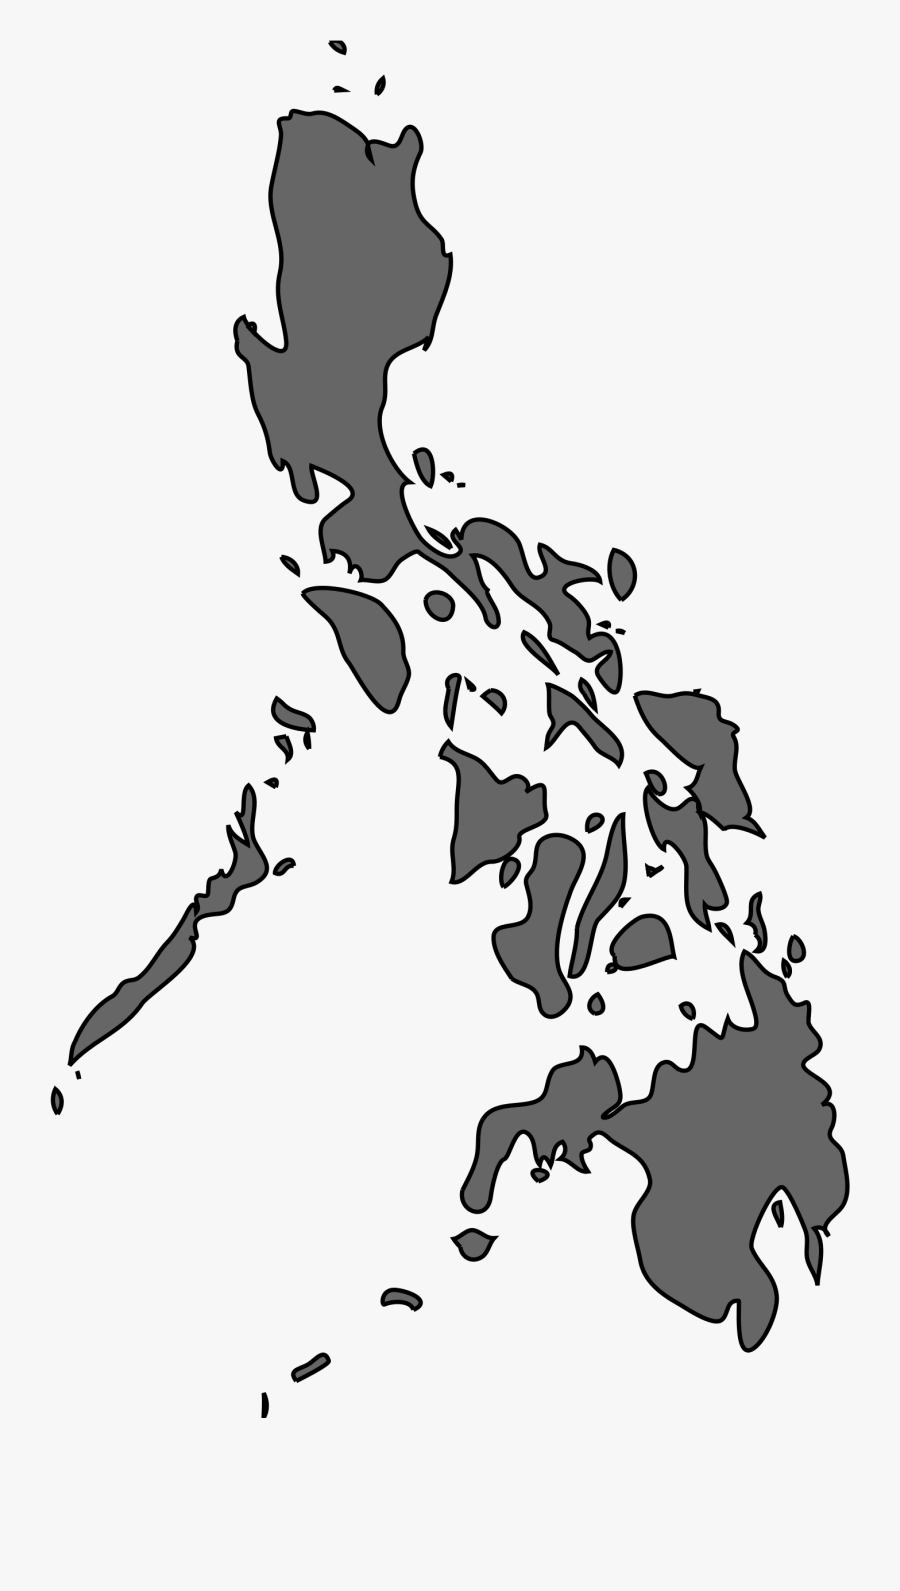 Thumb Image - Philippine Map Silhouette Png, Transparent Clipart